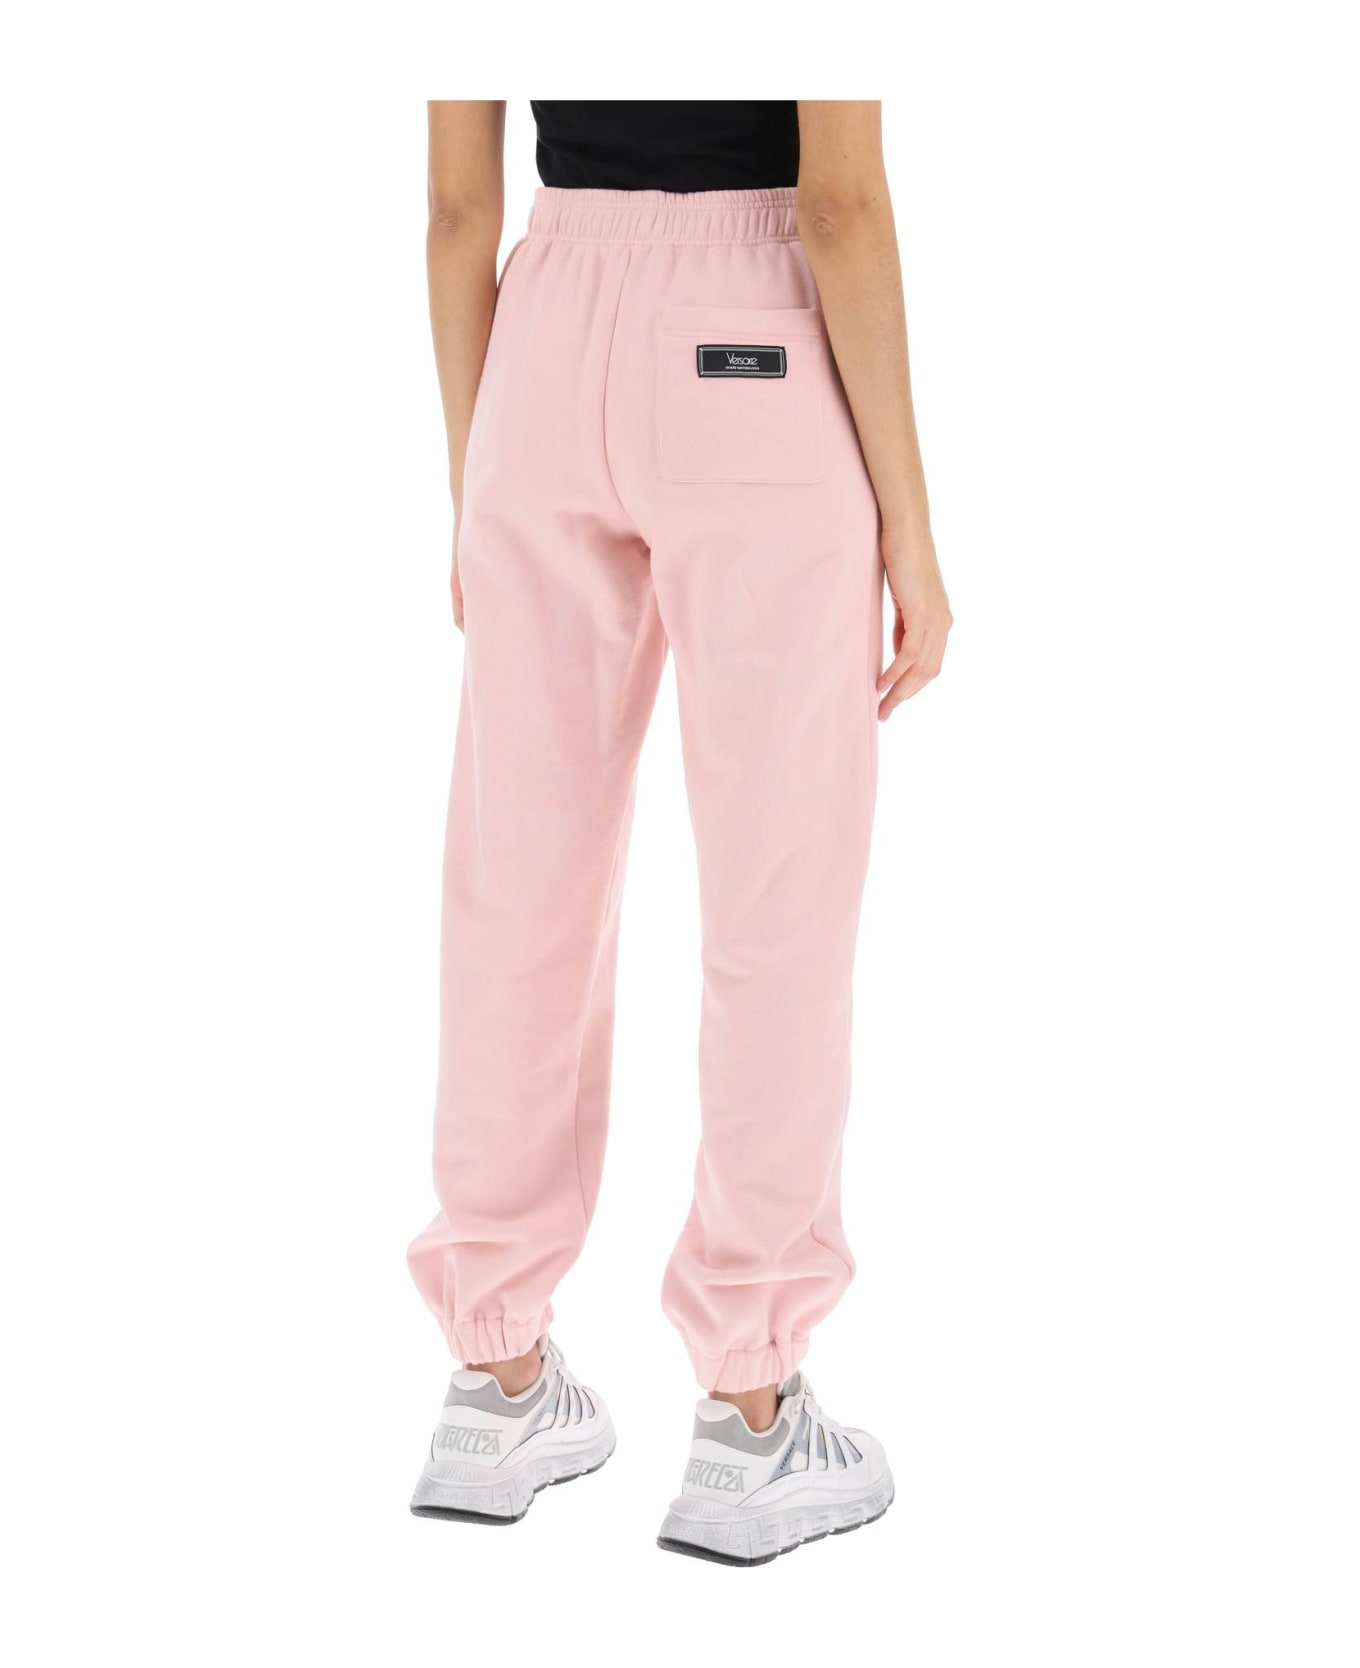 Versace 1978 Re-edition Joggers - PINK WHITE (Pink)